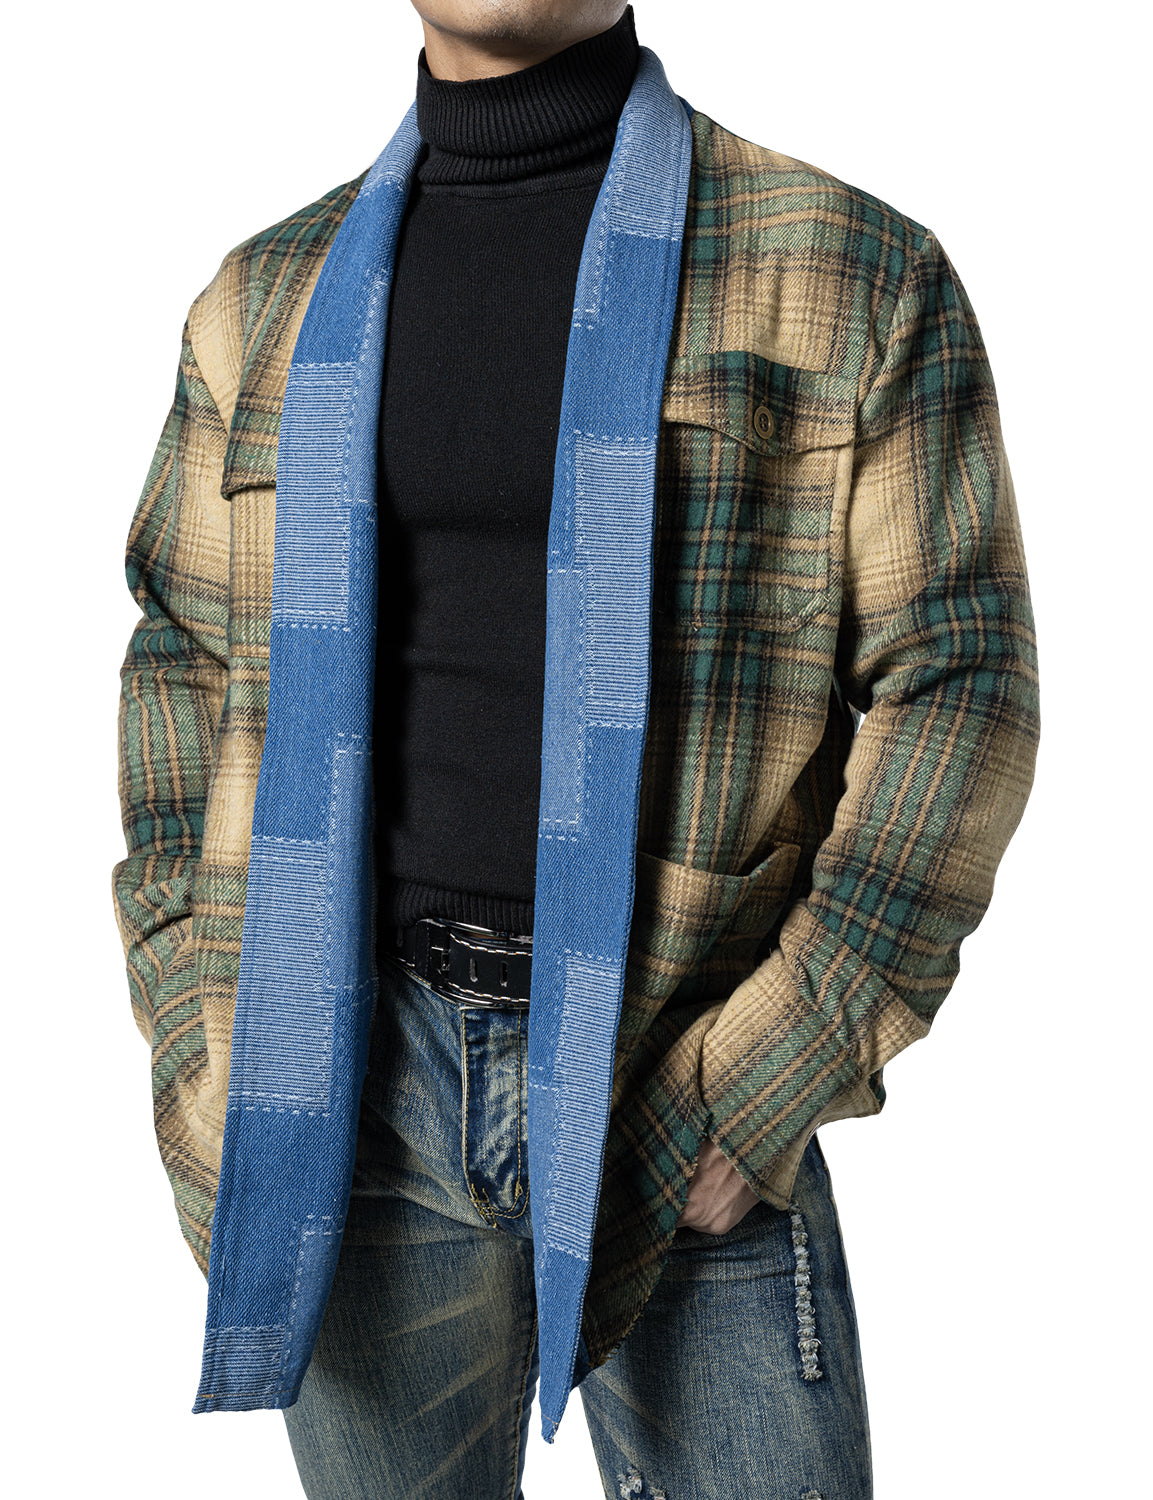 JOGAL Mens Flannel Plaid Shirt Jacket Long Sleeve Casual Open Front Outwear with Pockets